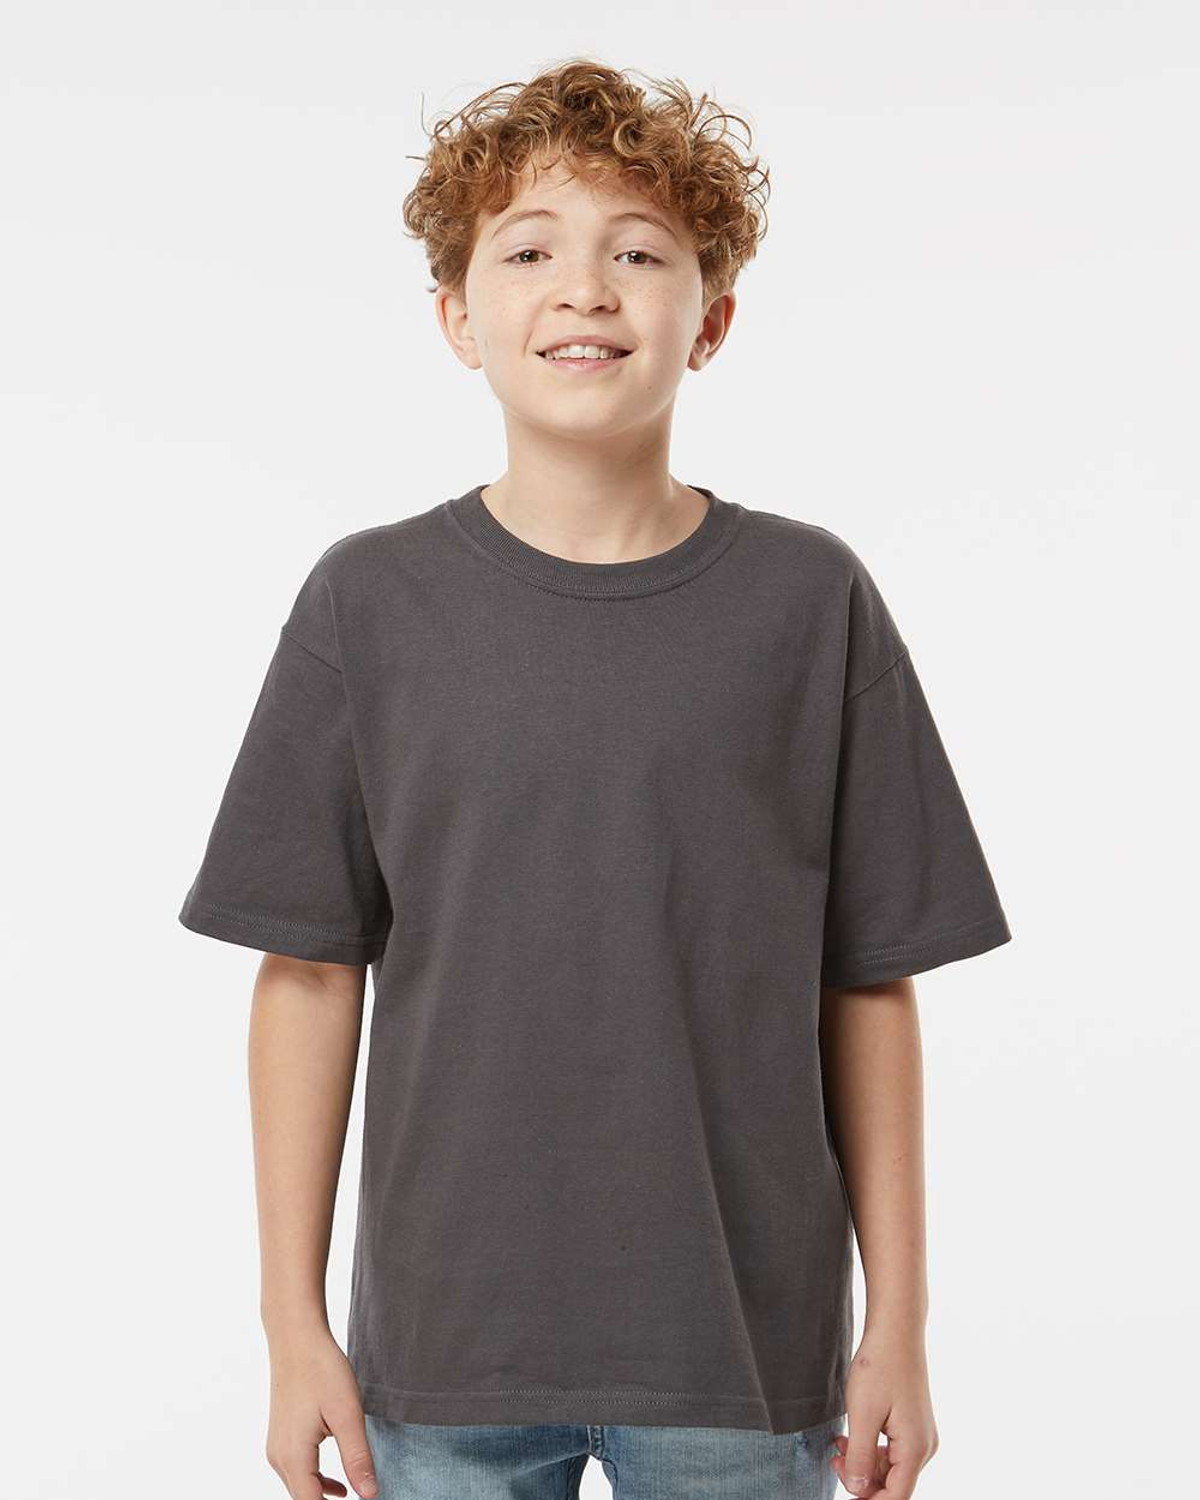 M&O 4850 Youth Gold Soft Touch T-shirt